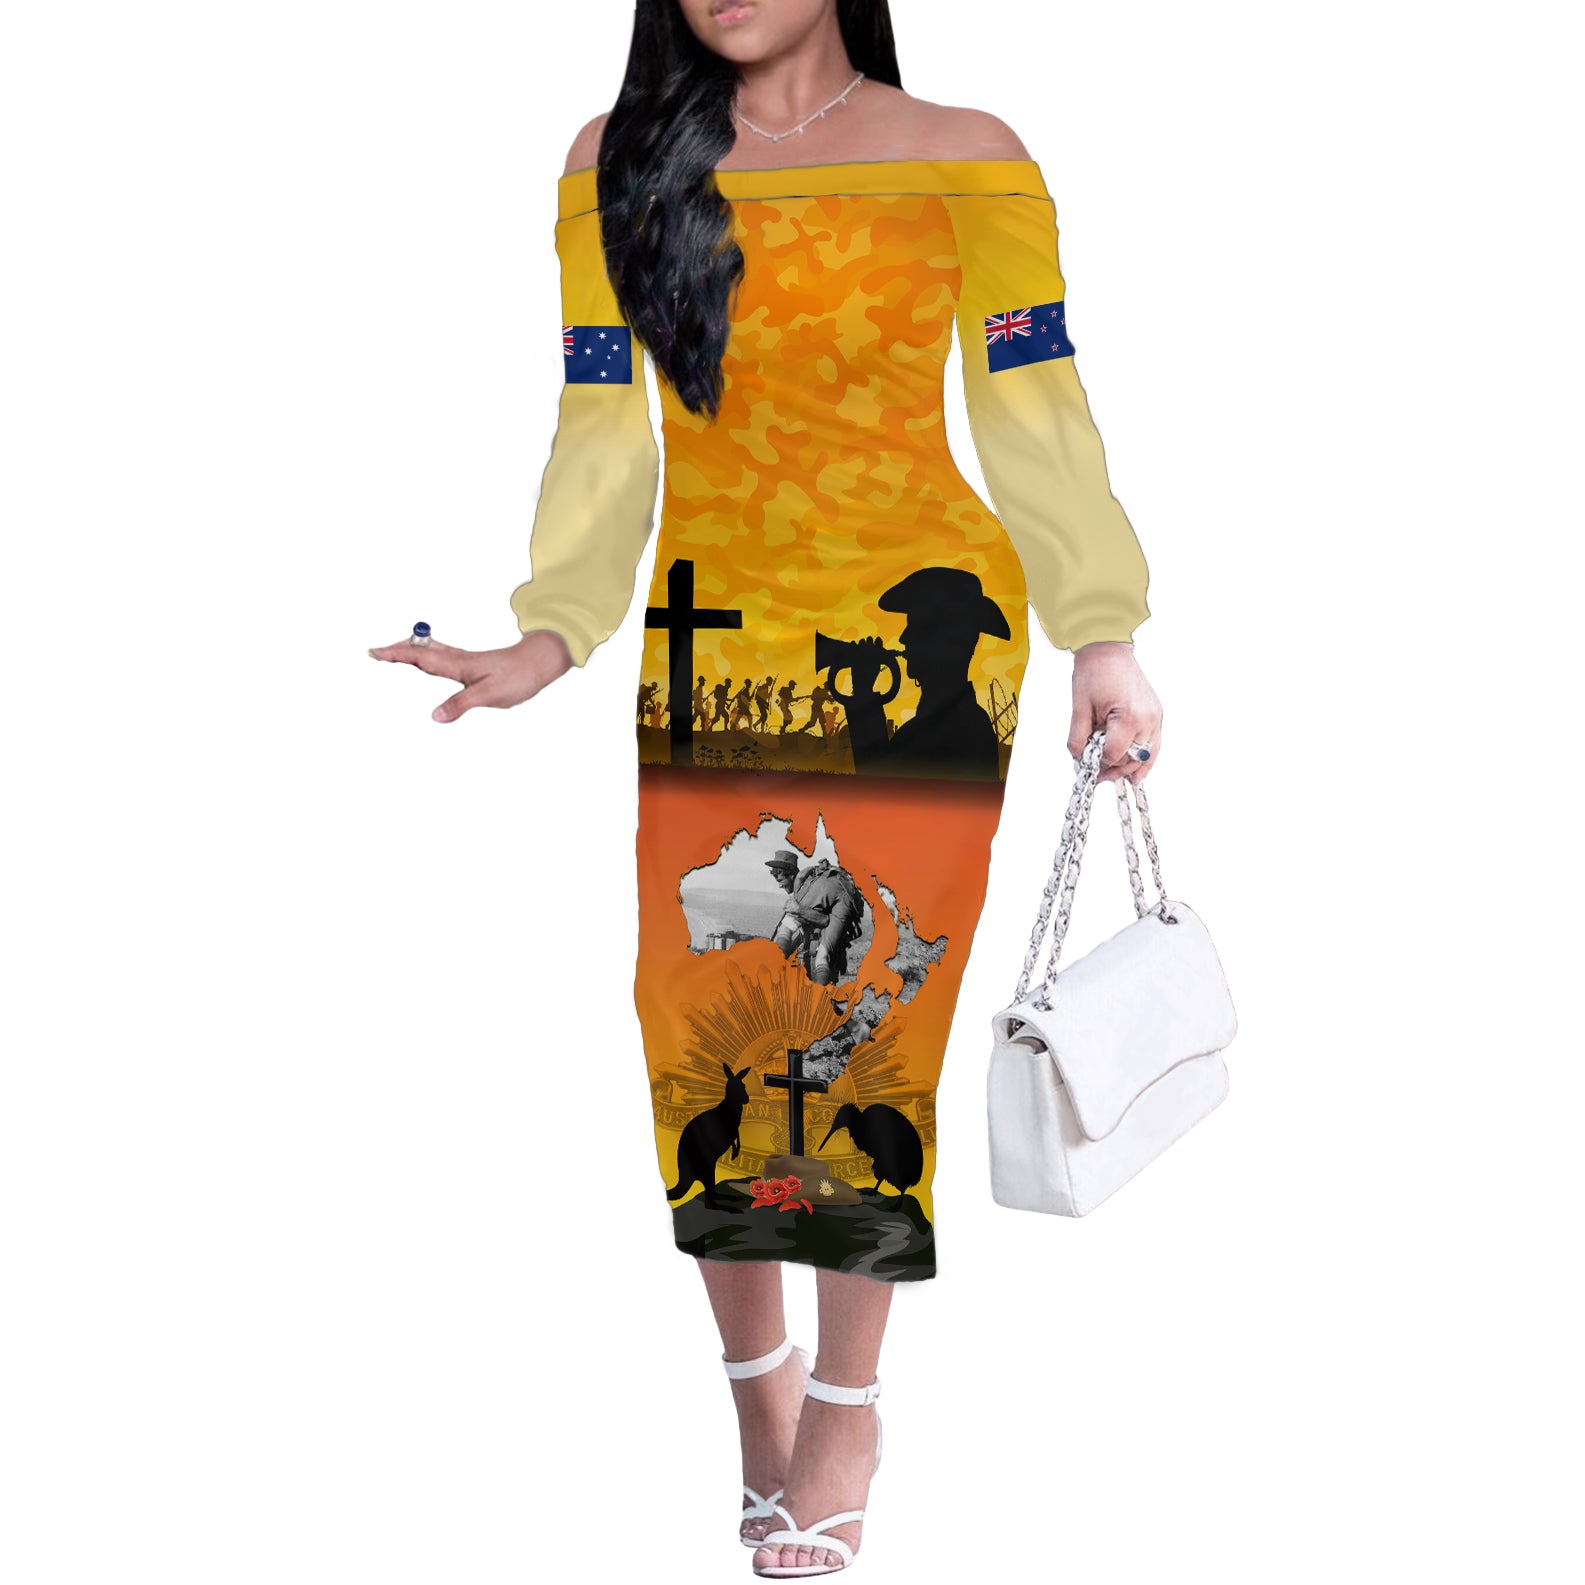 New Zealand and Australia ANZAC Day Off The Shoulder Long Sleeve Dress Gallipoli Lest We Forget LT03 Women Yellow - Polynesian Pride